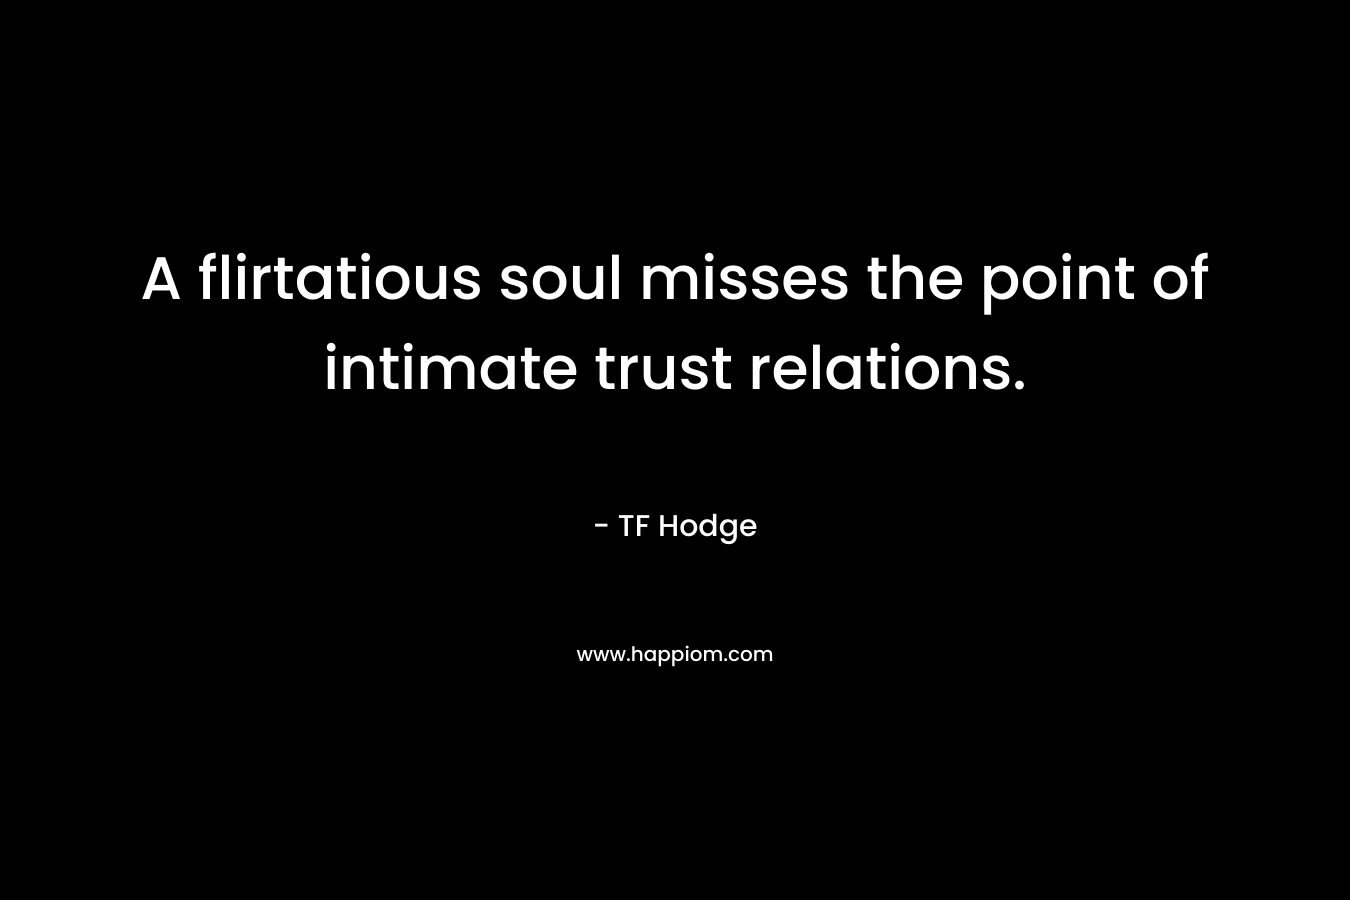 A flirtatious soul misses the point of intimate trust relations.